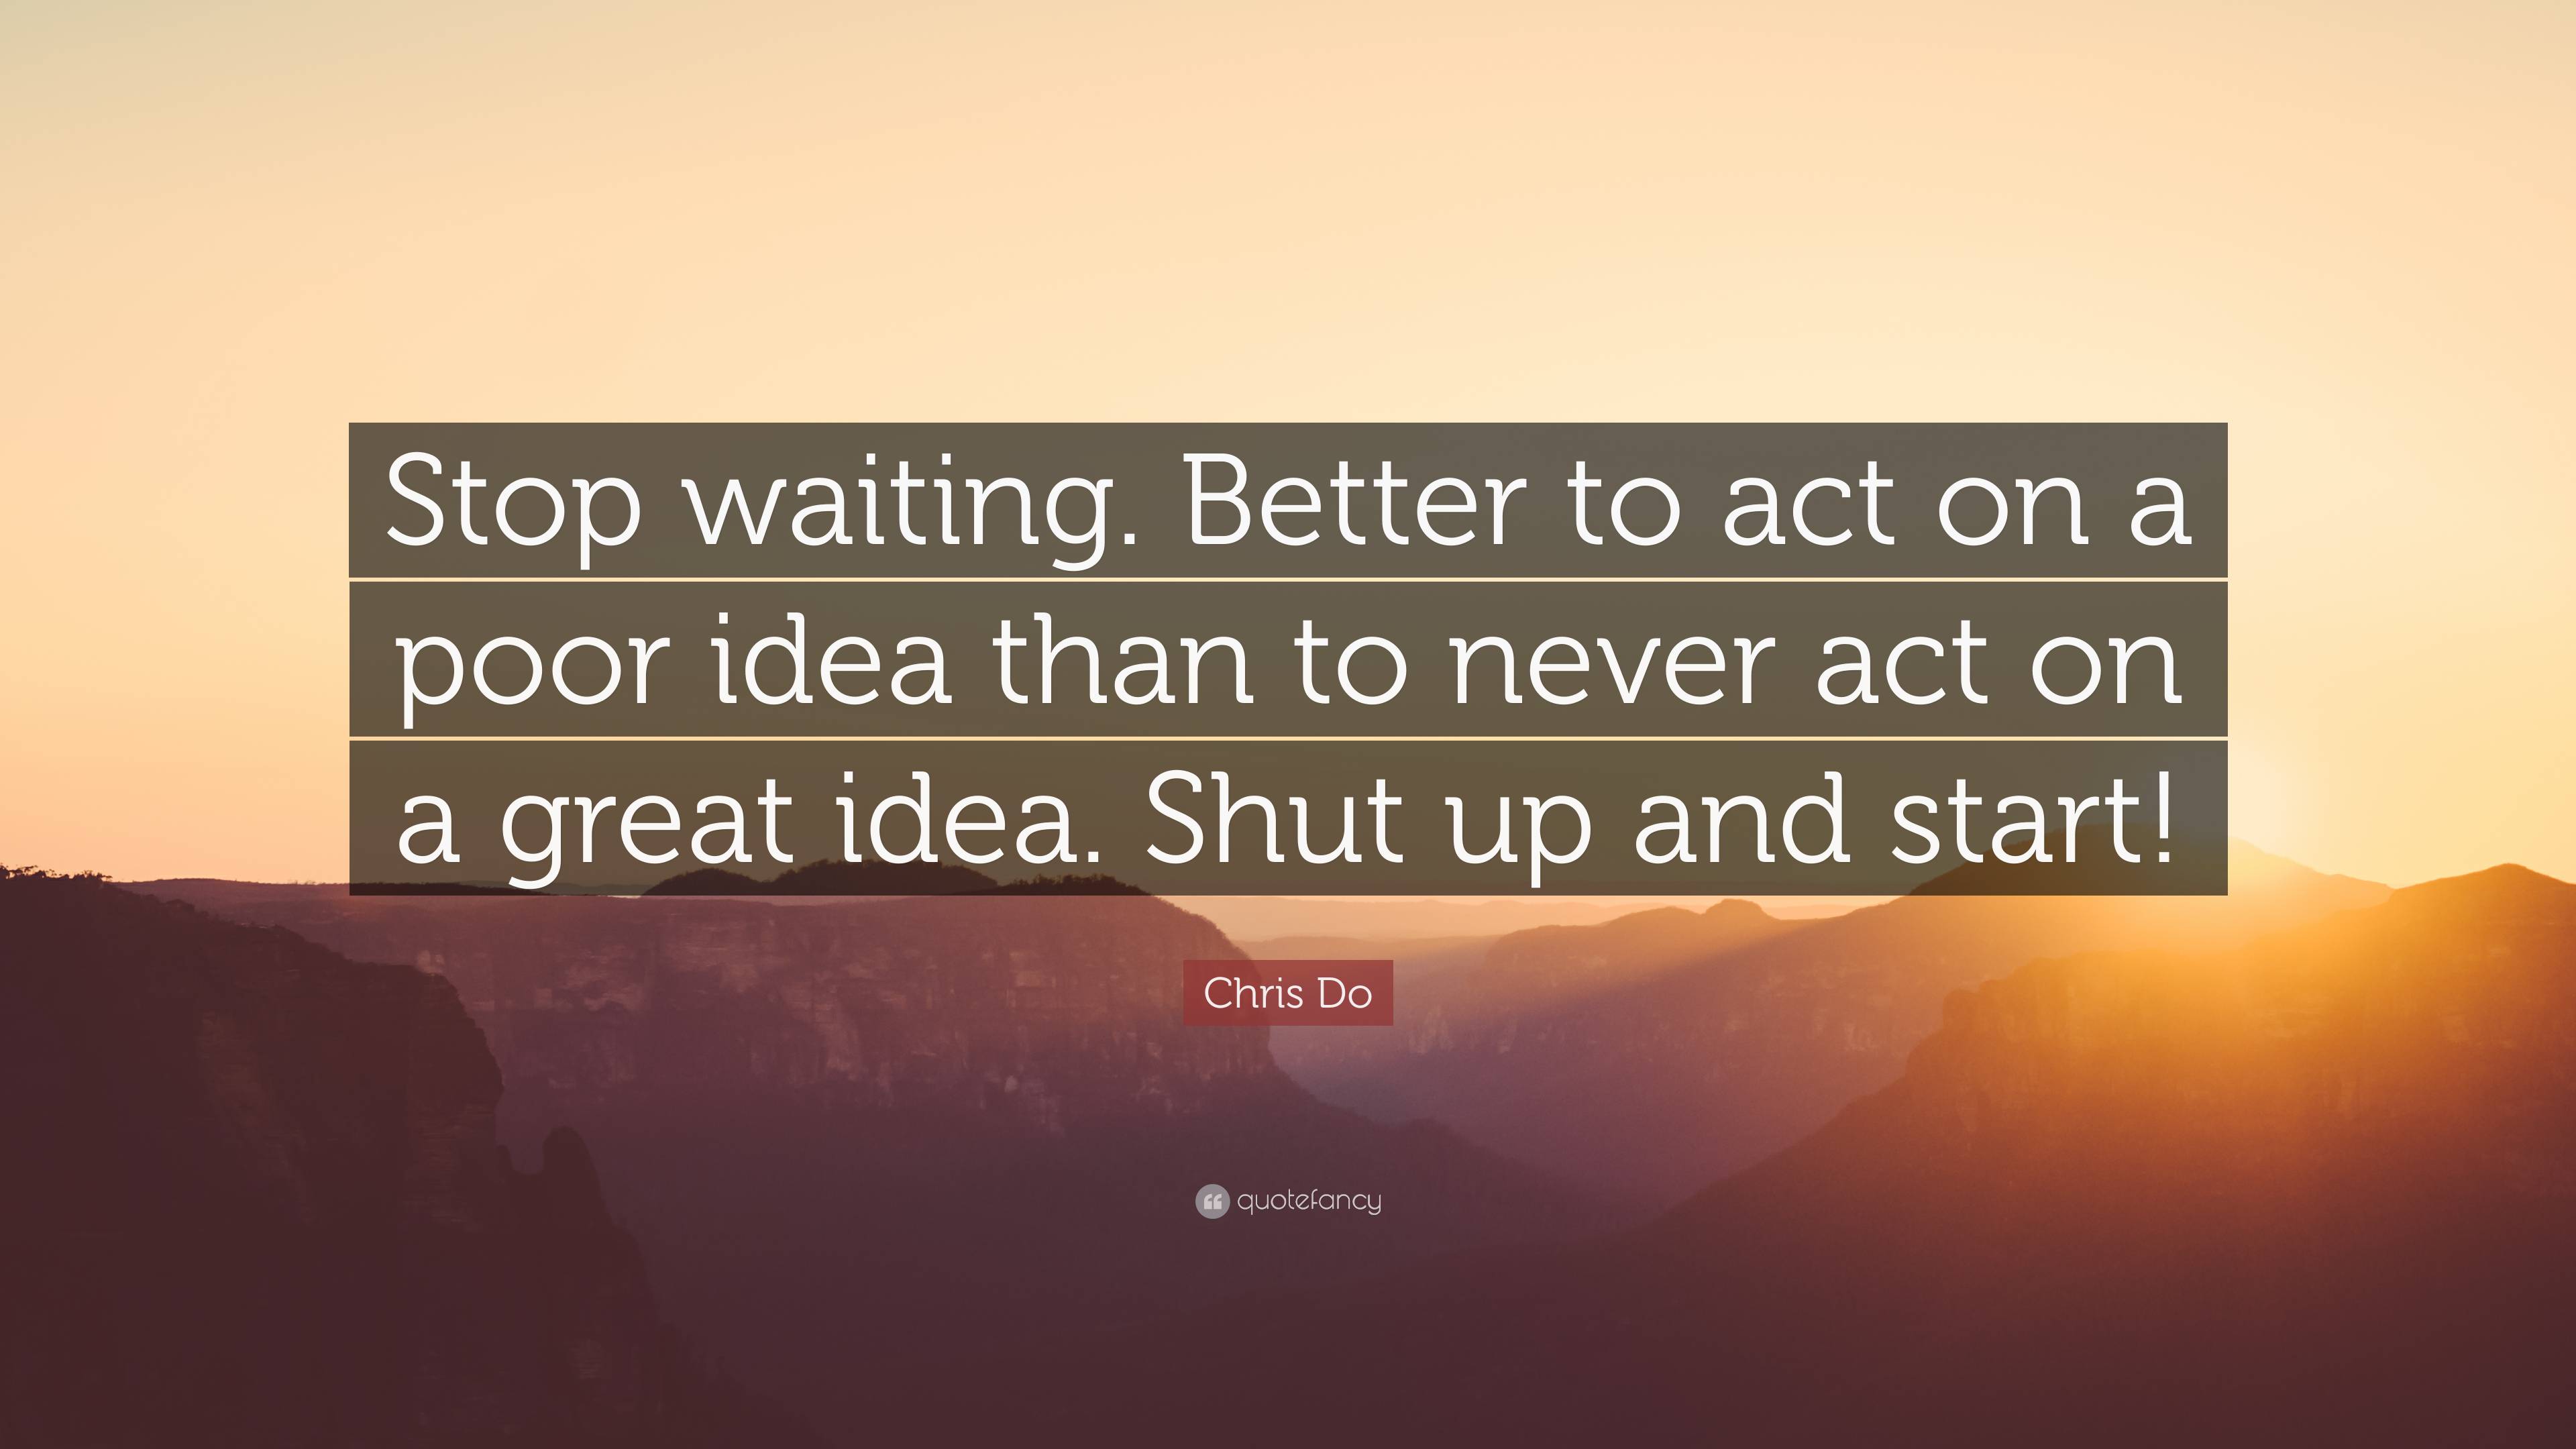 Chris Do Quote: “Stop waiting. Better to act on a poor idea than to ...